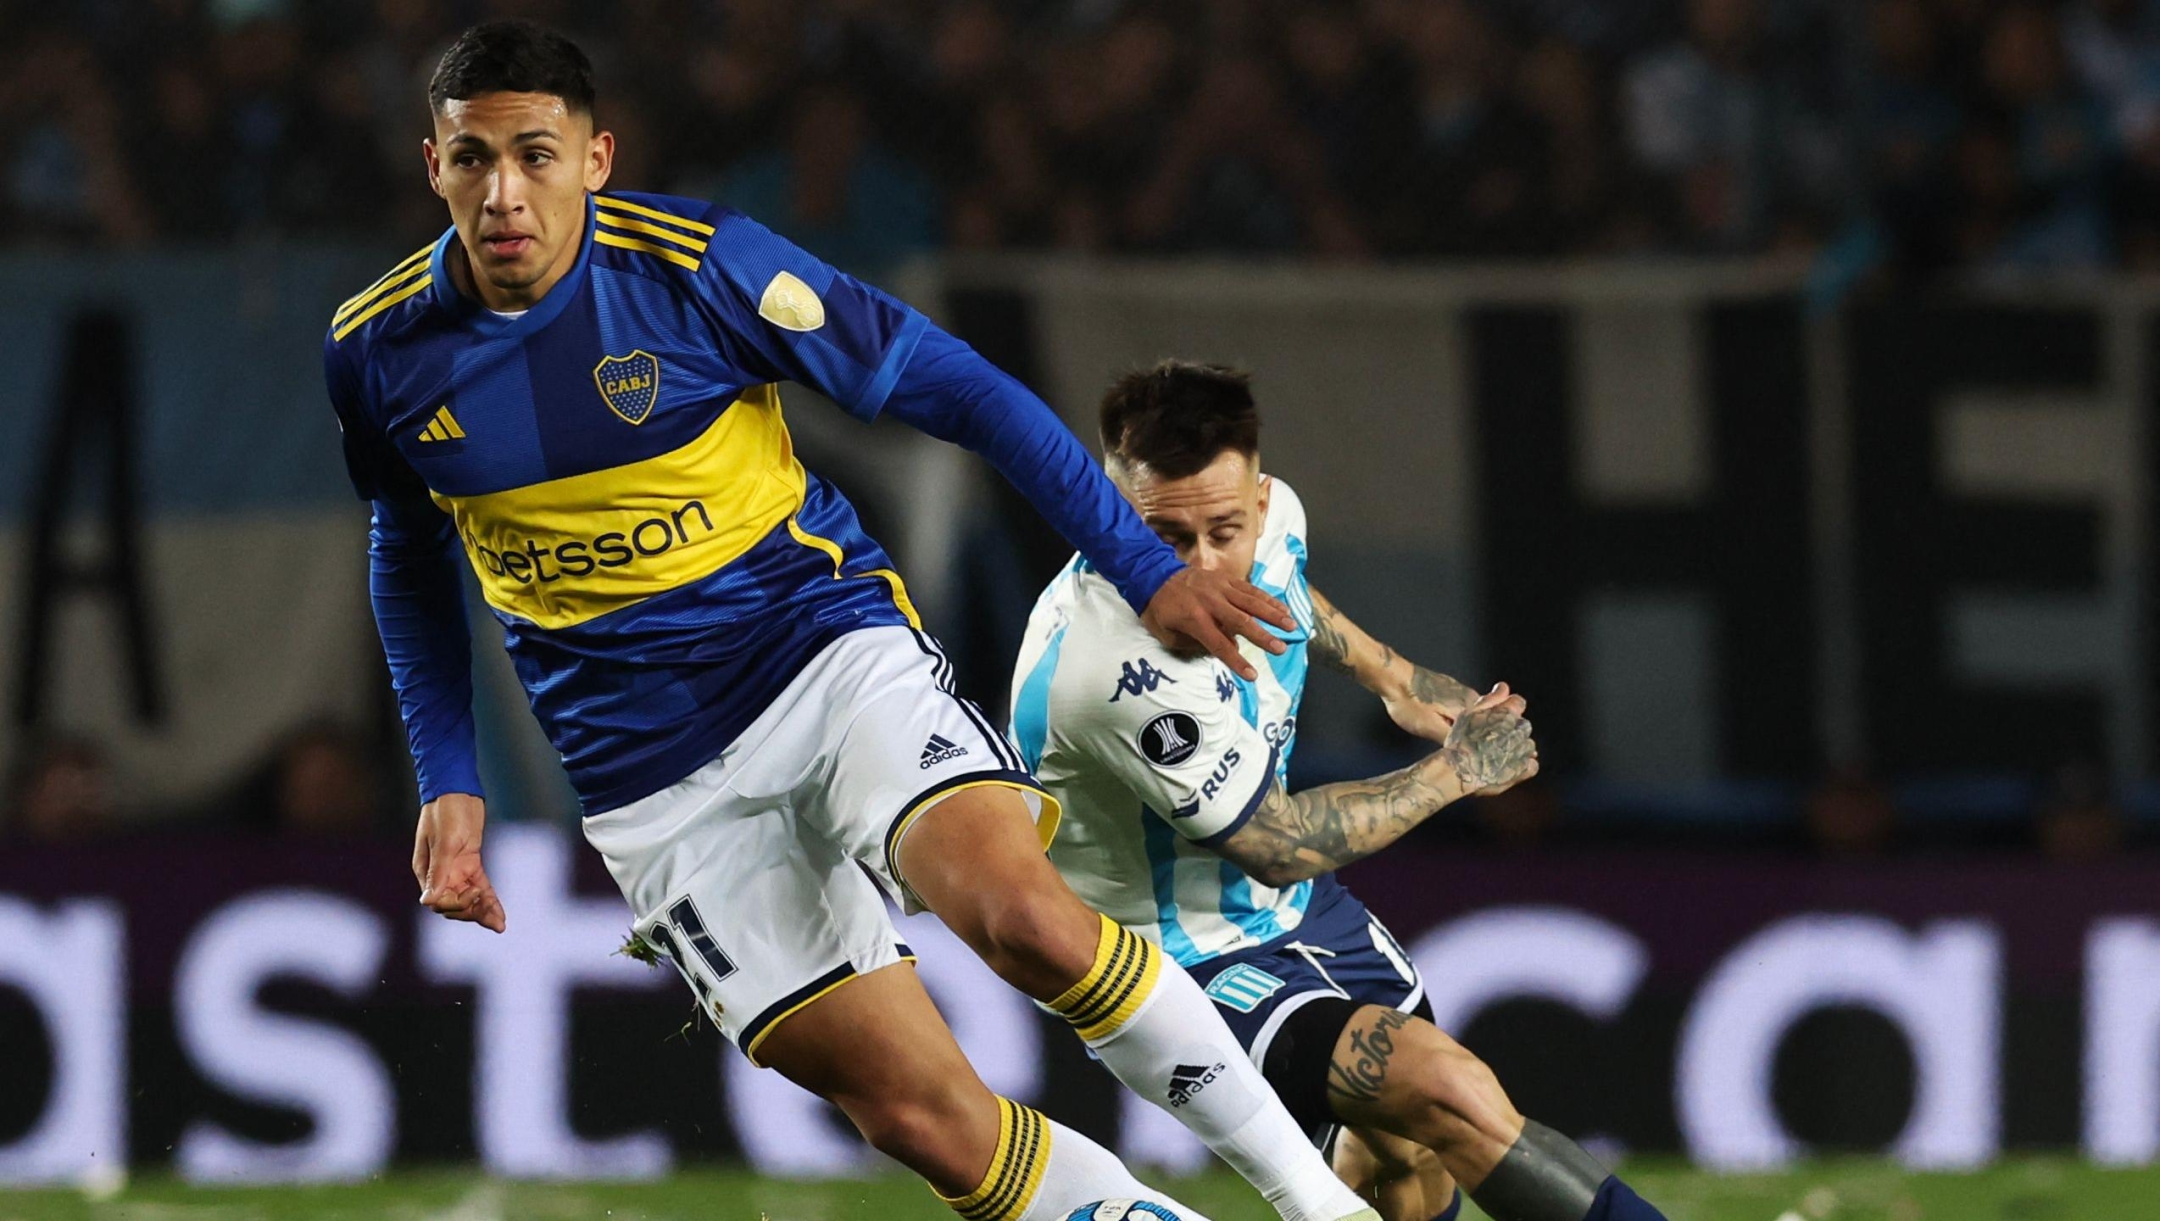 Boca Juniors' midfielder Ezequiel Fernandez (L) is challenged by Racing's midfielder Jonatan Gomez during the all-Argentine Copa Libertadores quarterfinals second leg football match between Racing Club and Boca Juniors, at the El Cilindro (Presidente Juan Domingo Peron) stadium, in Buenos Aires on August 30, 2023. (Photo by ALEJANDRO PAGNI / AFP)